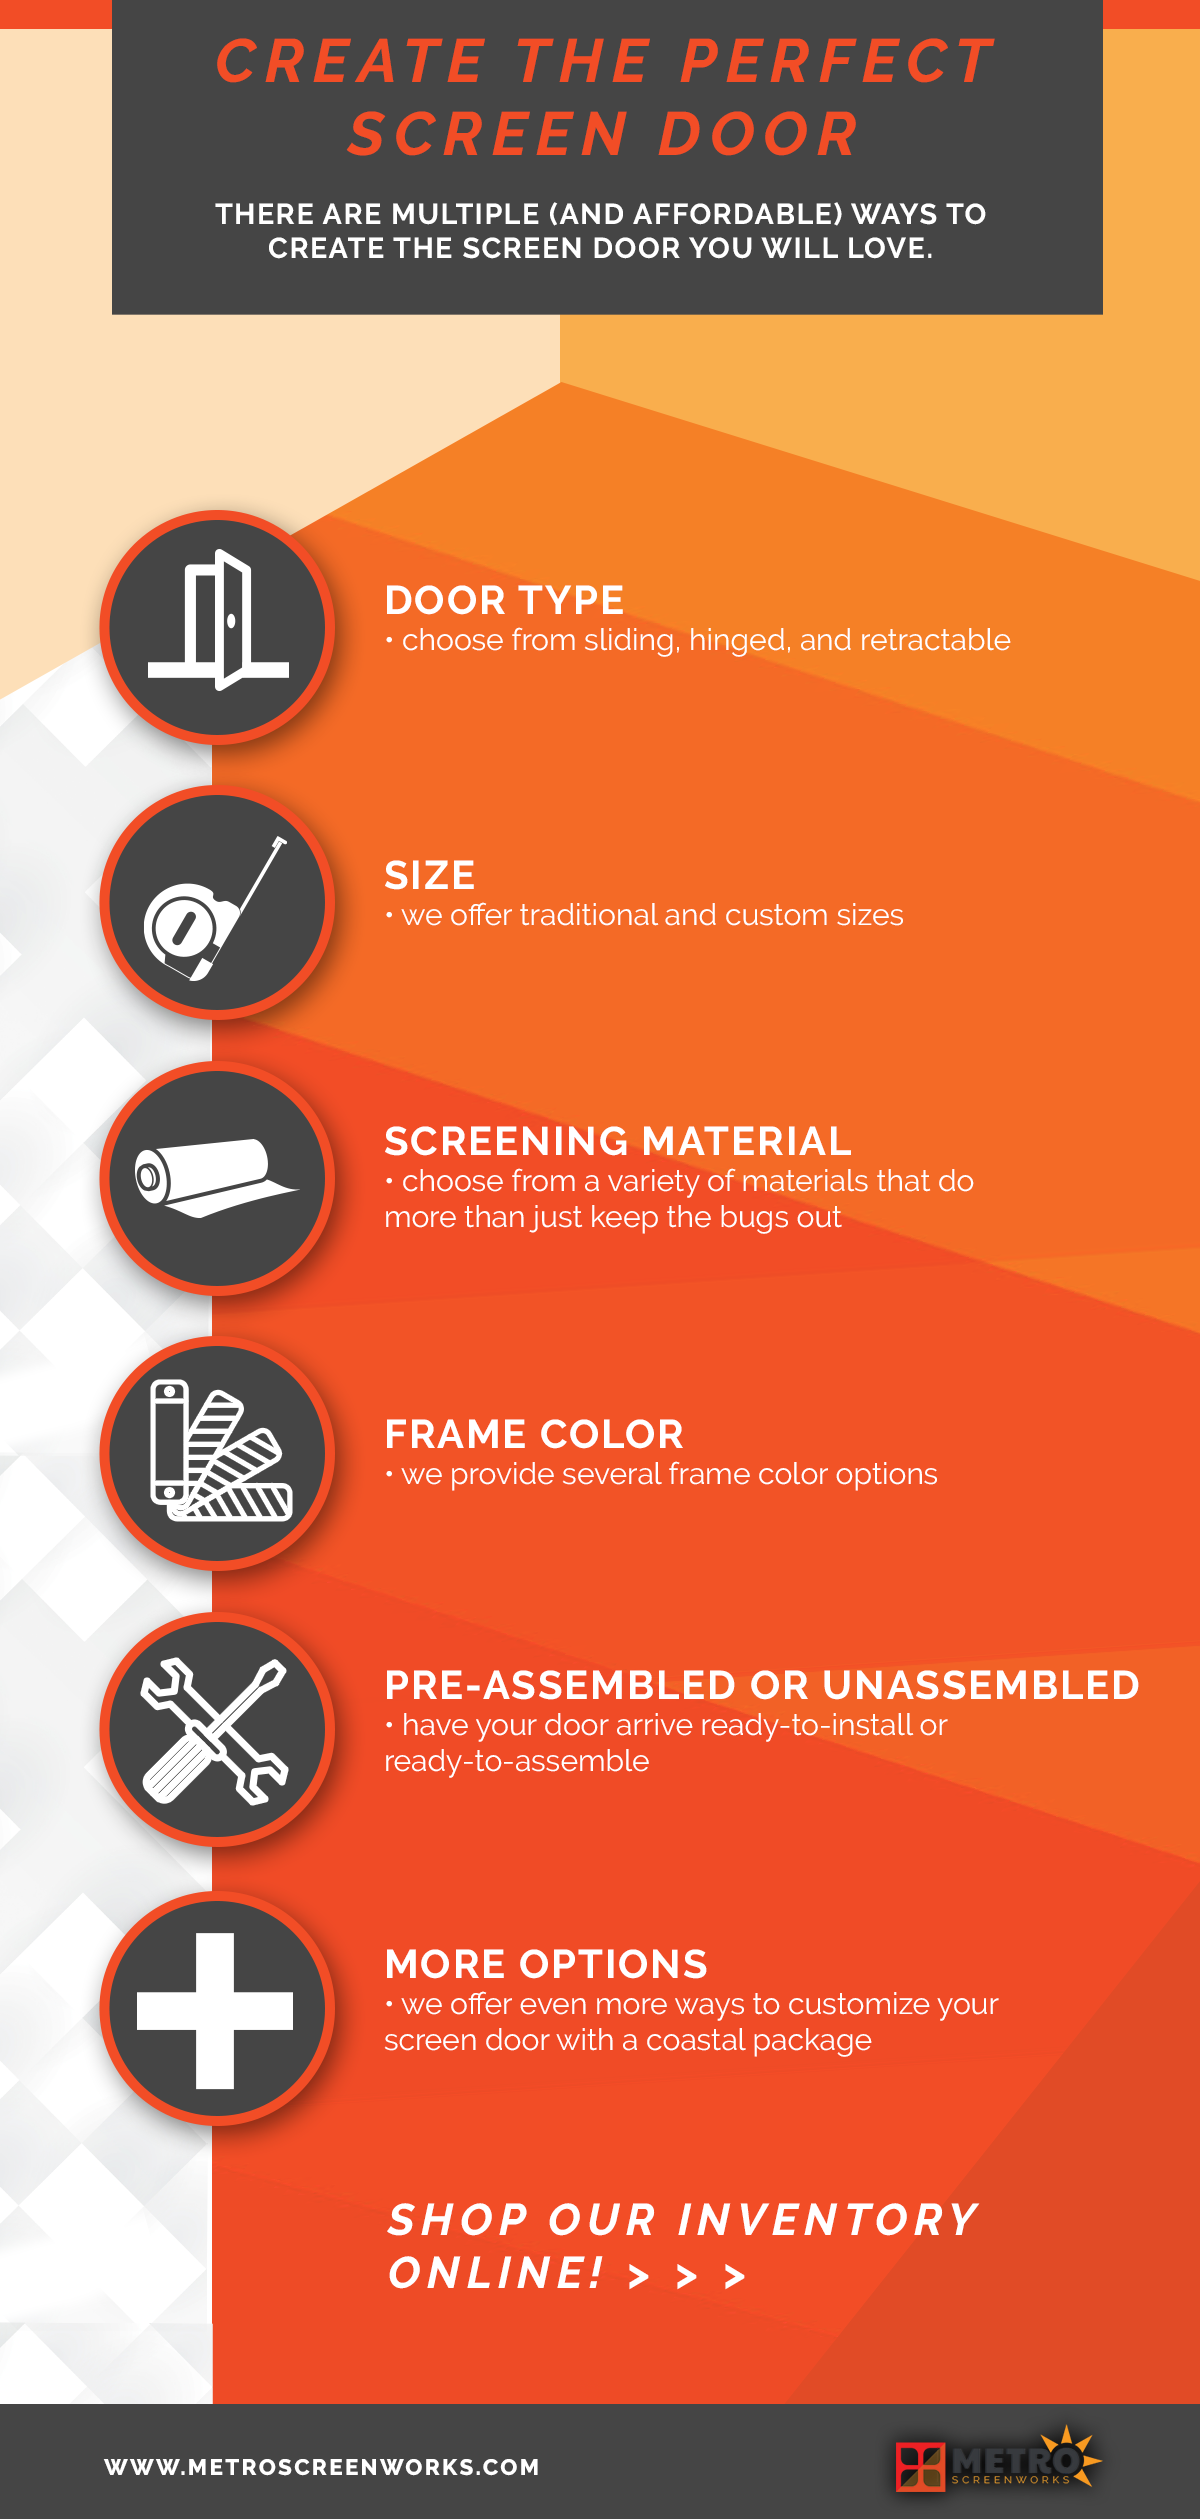 Infographic about creating the perfect screen door